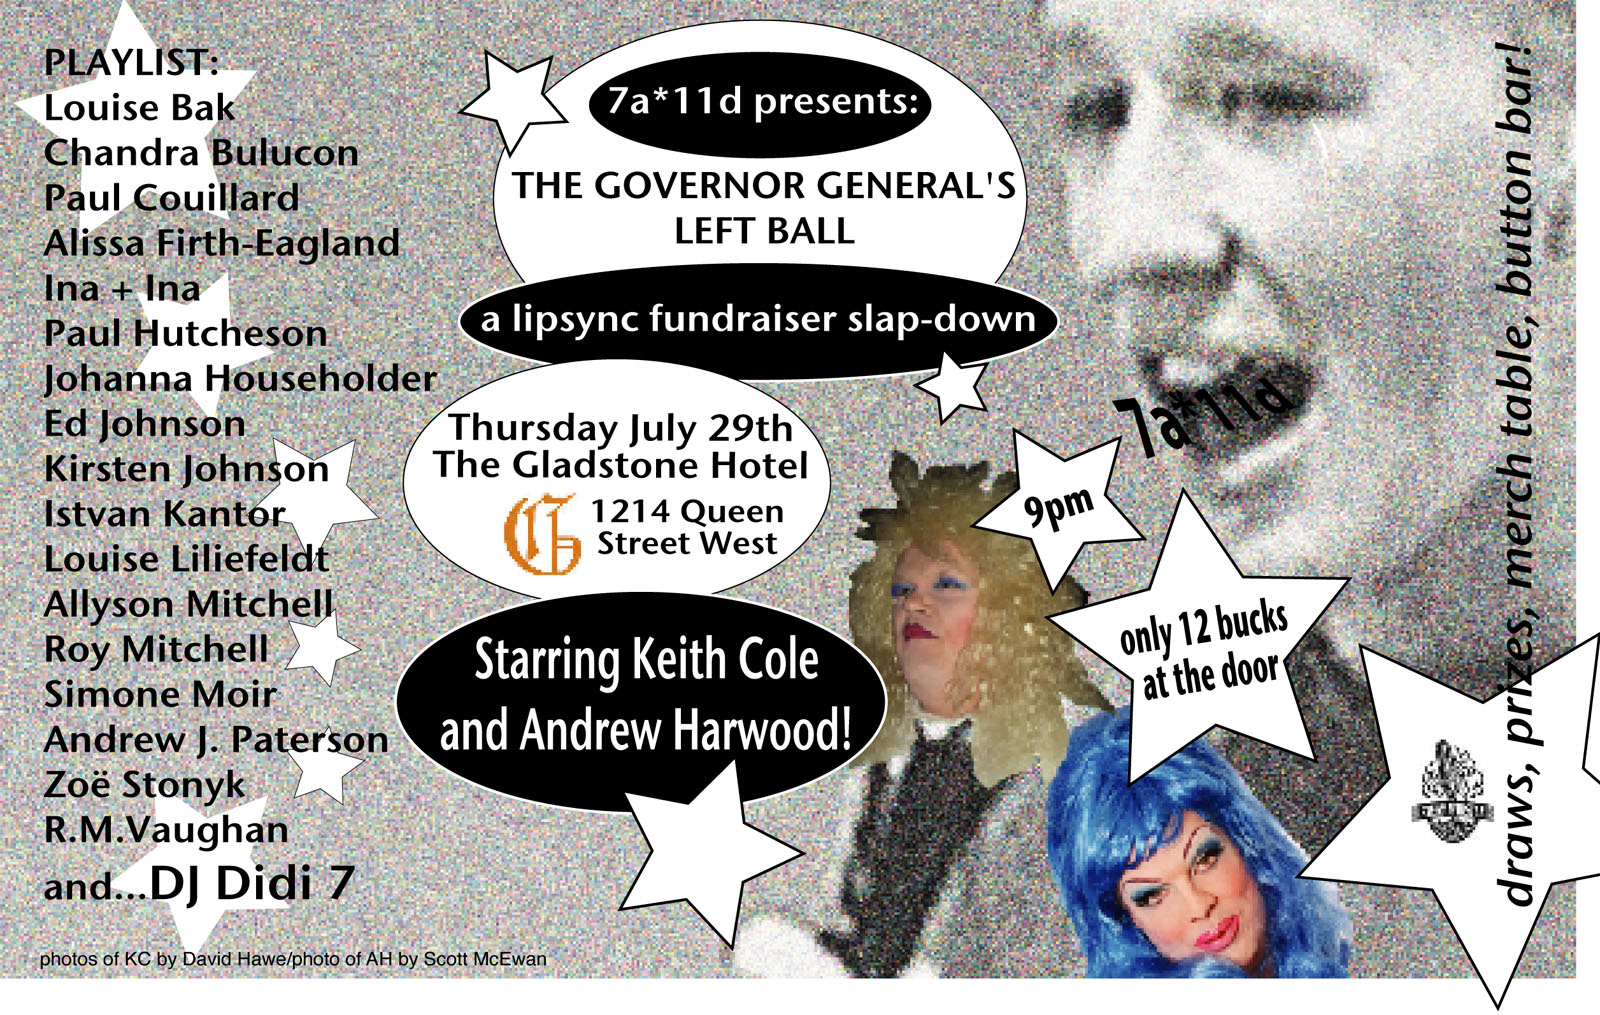 7a*11d presents The Governer General's Left Ball Thursday July 29, The Gladstone Hotel